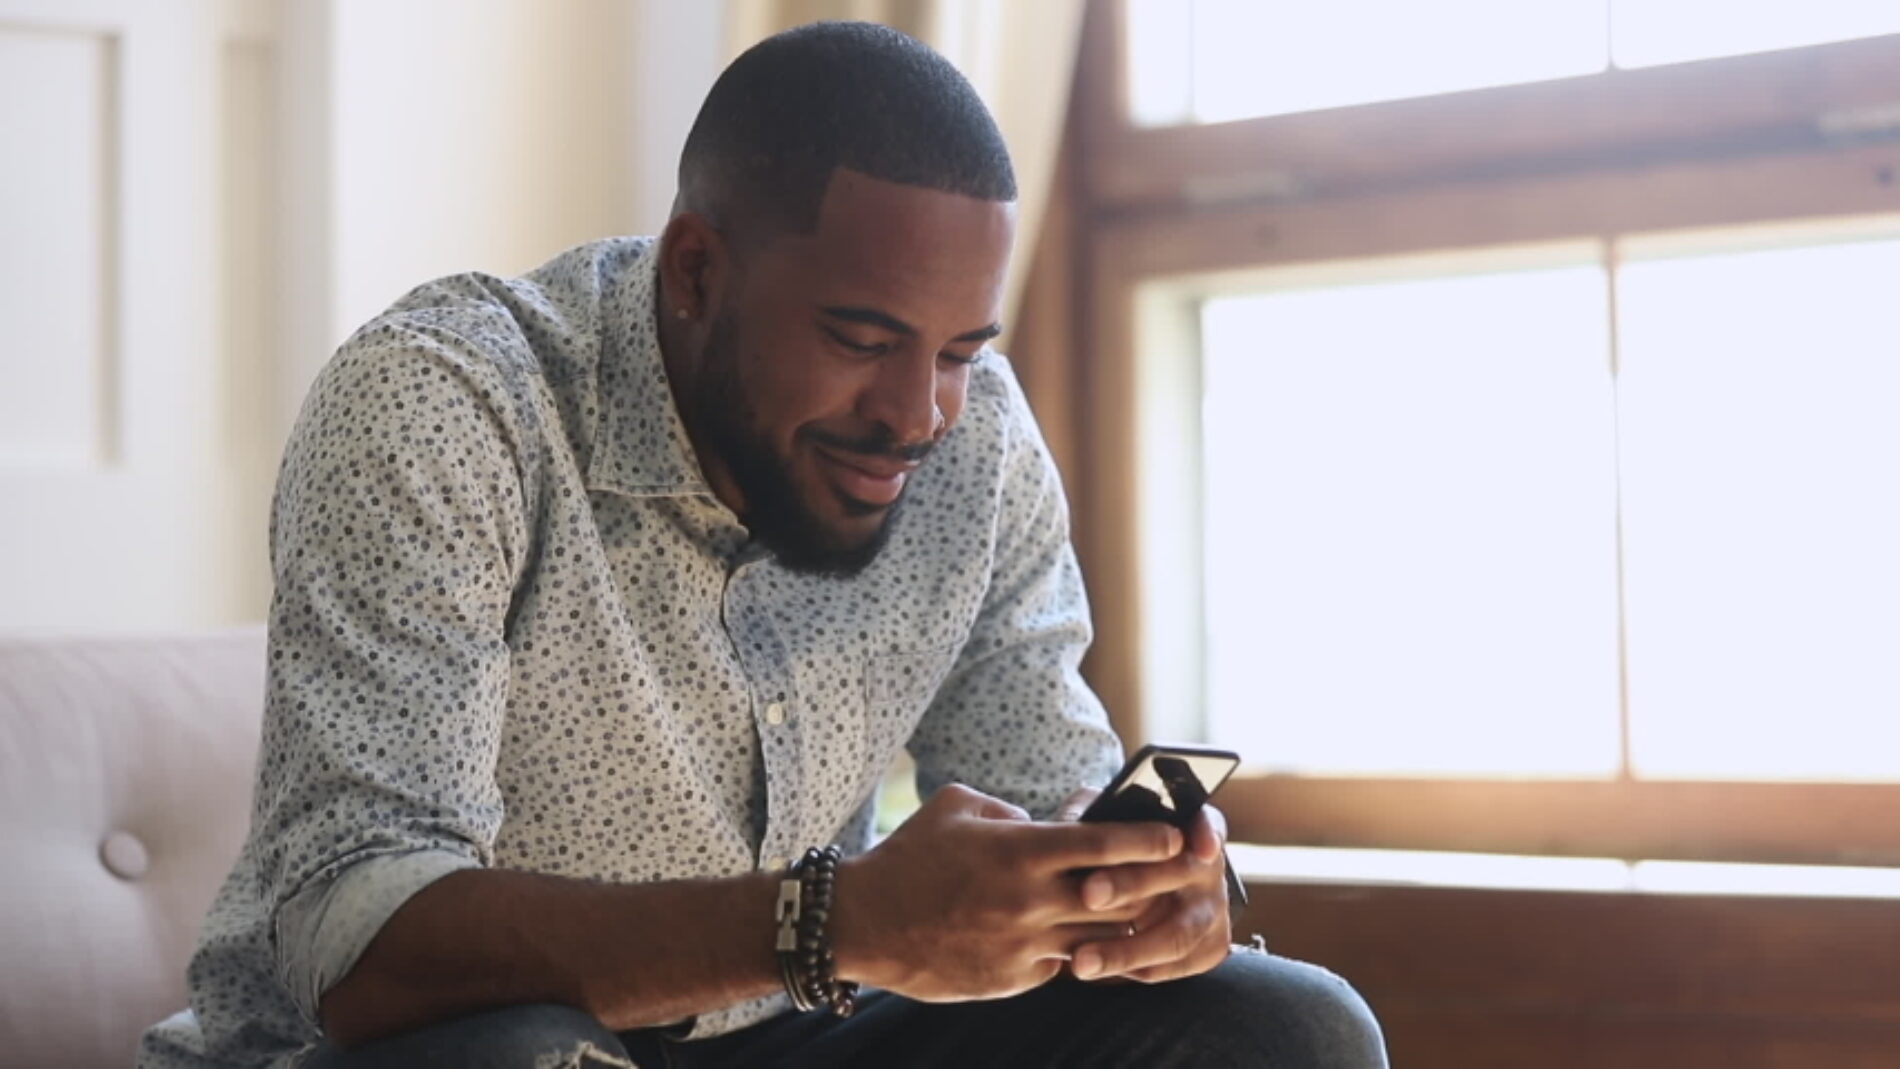 Gay guys talk about what anyone with unlimited access to their phones would find